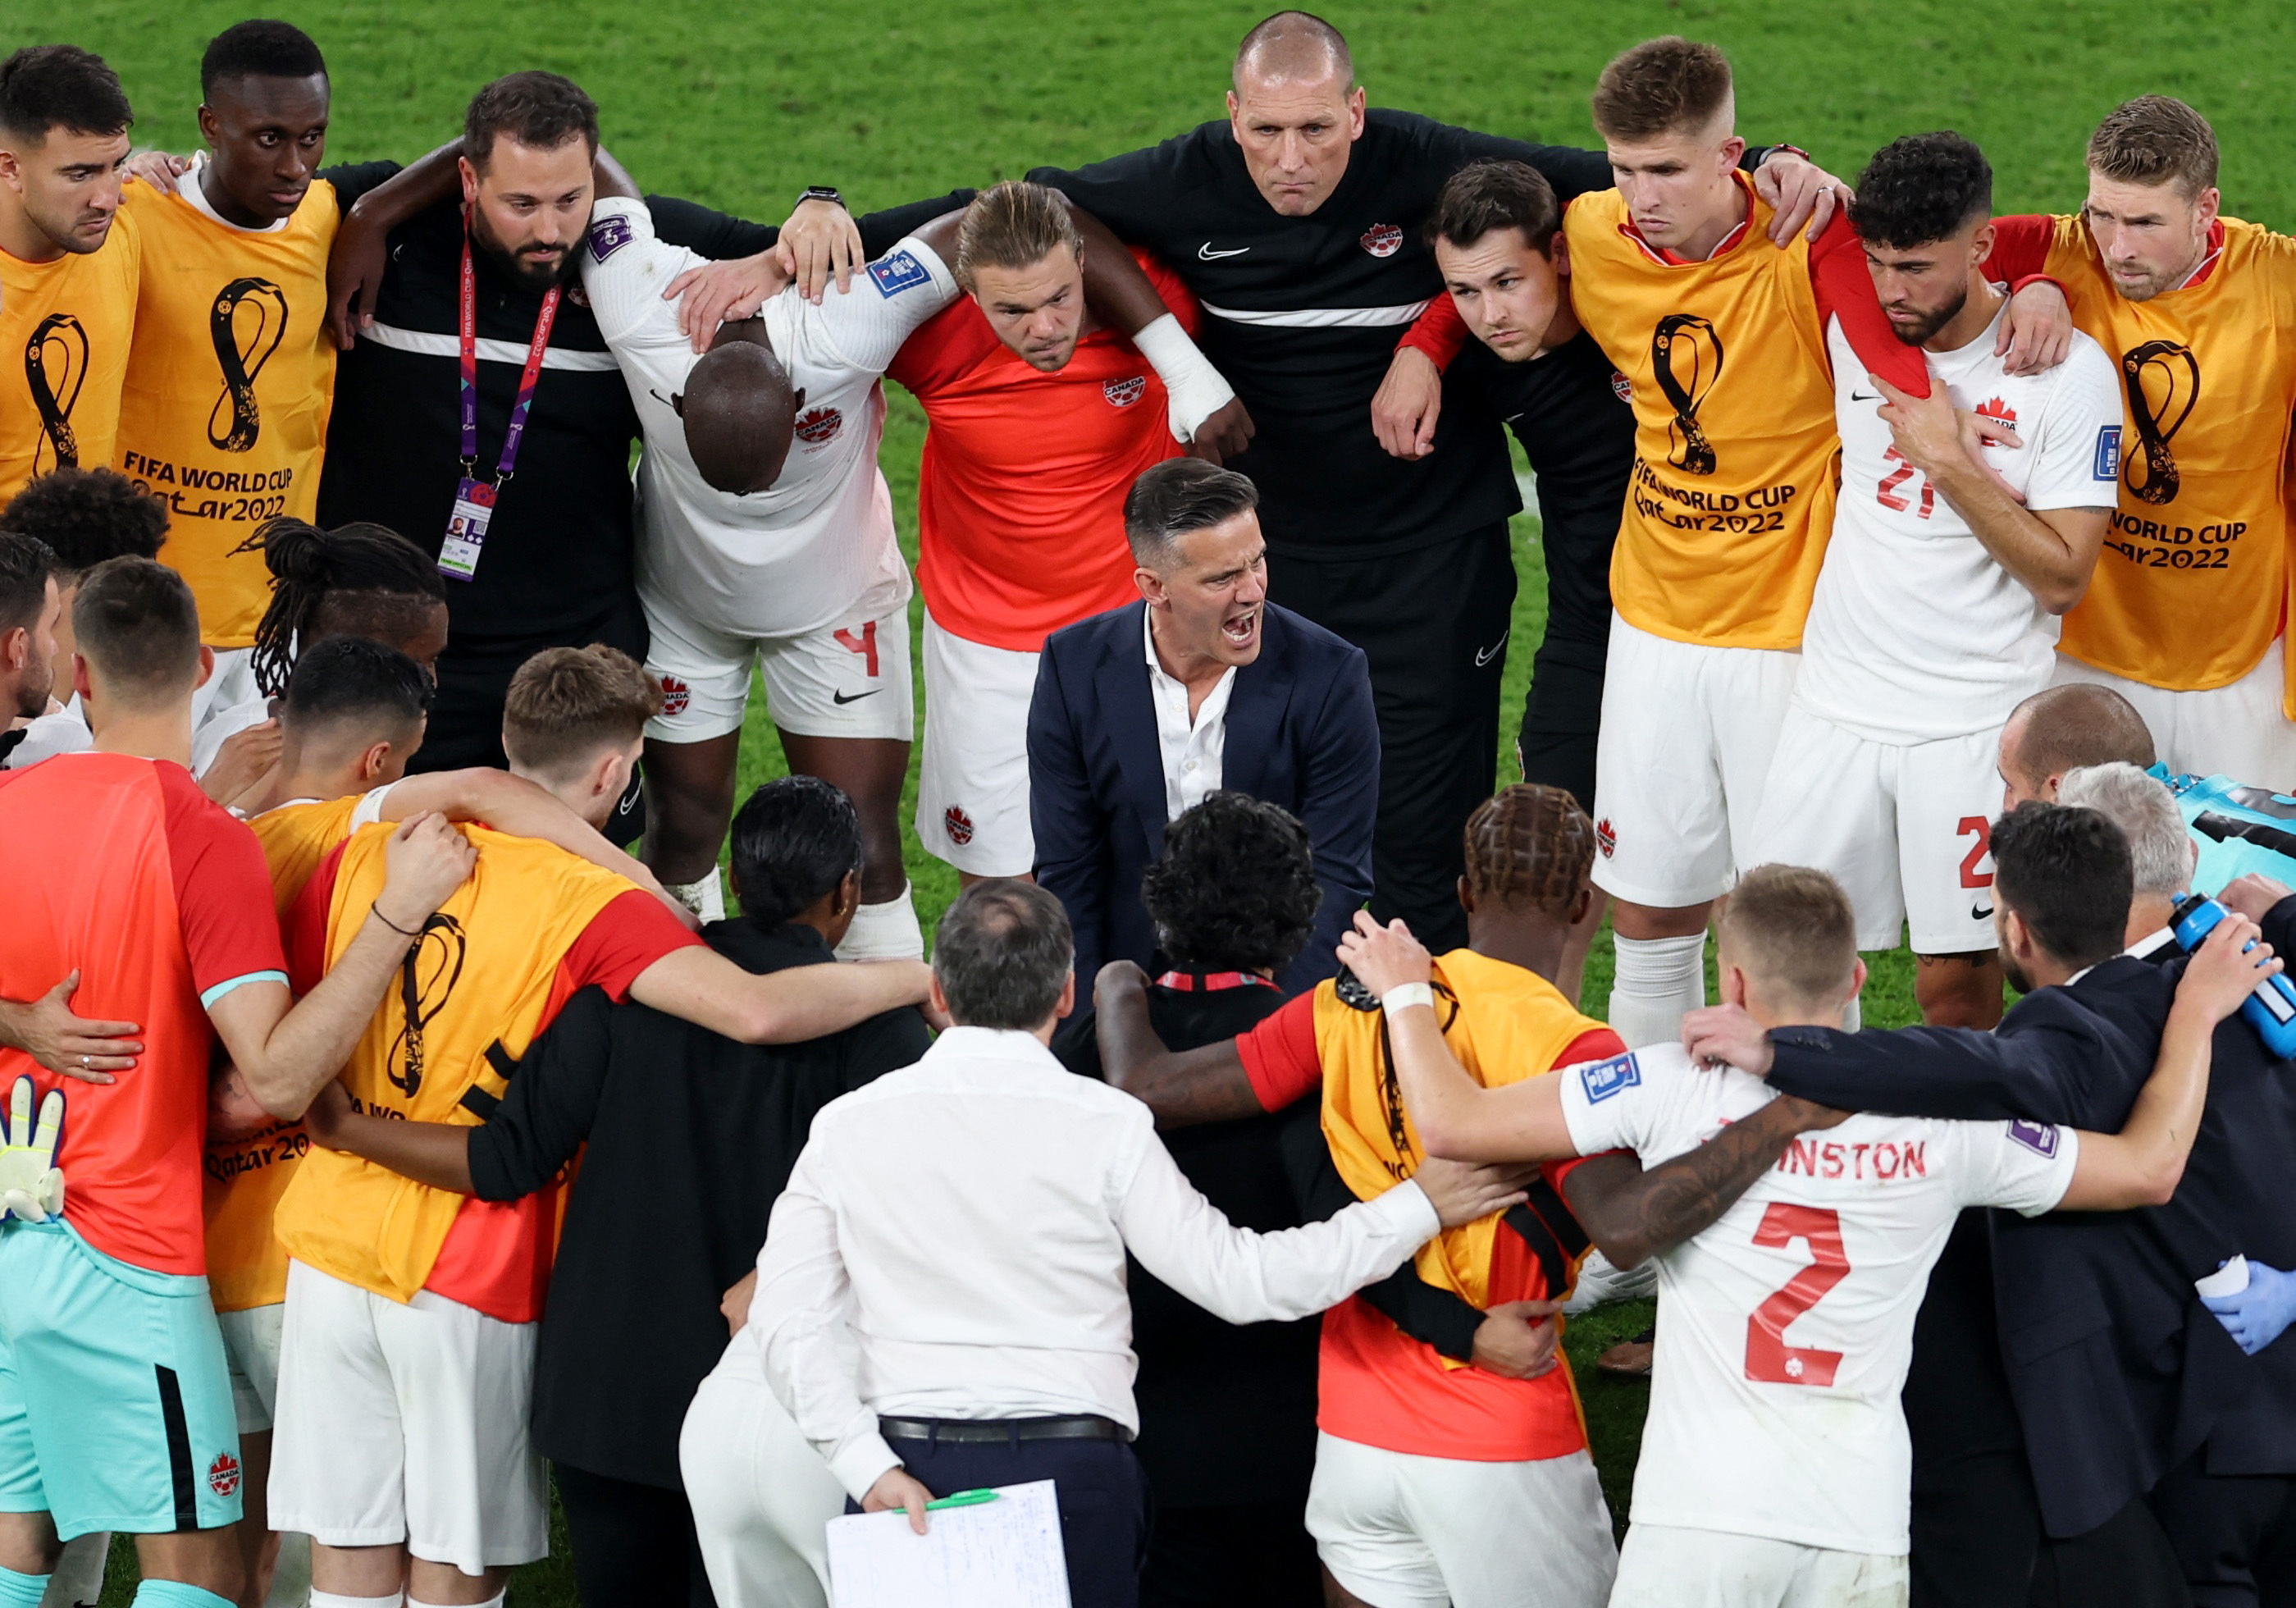 John Herdman in conversation with his players (Reuters/Molly Darlington)